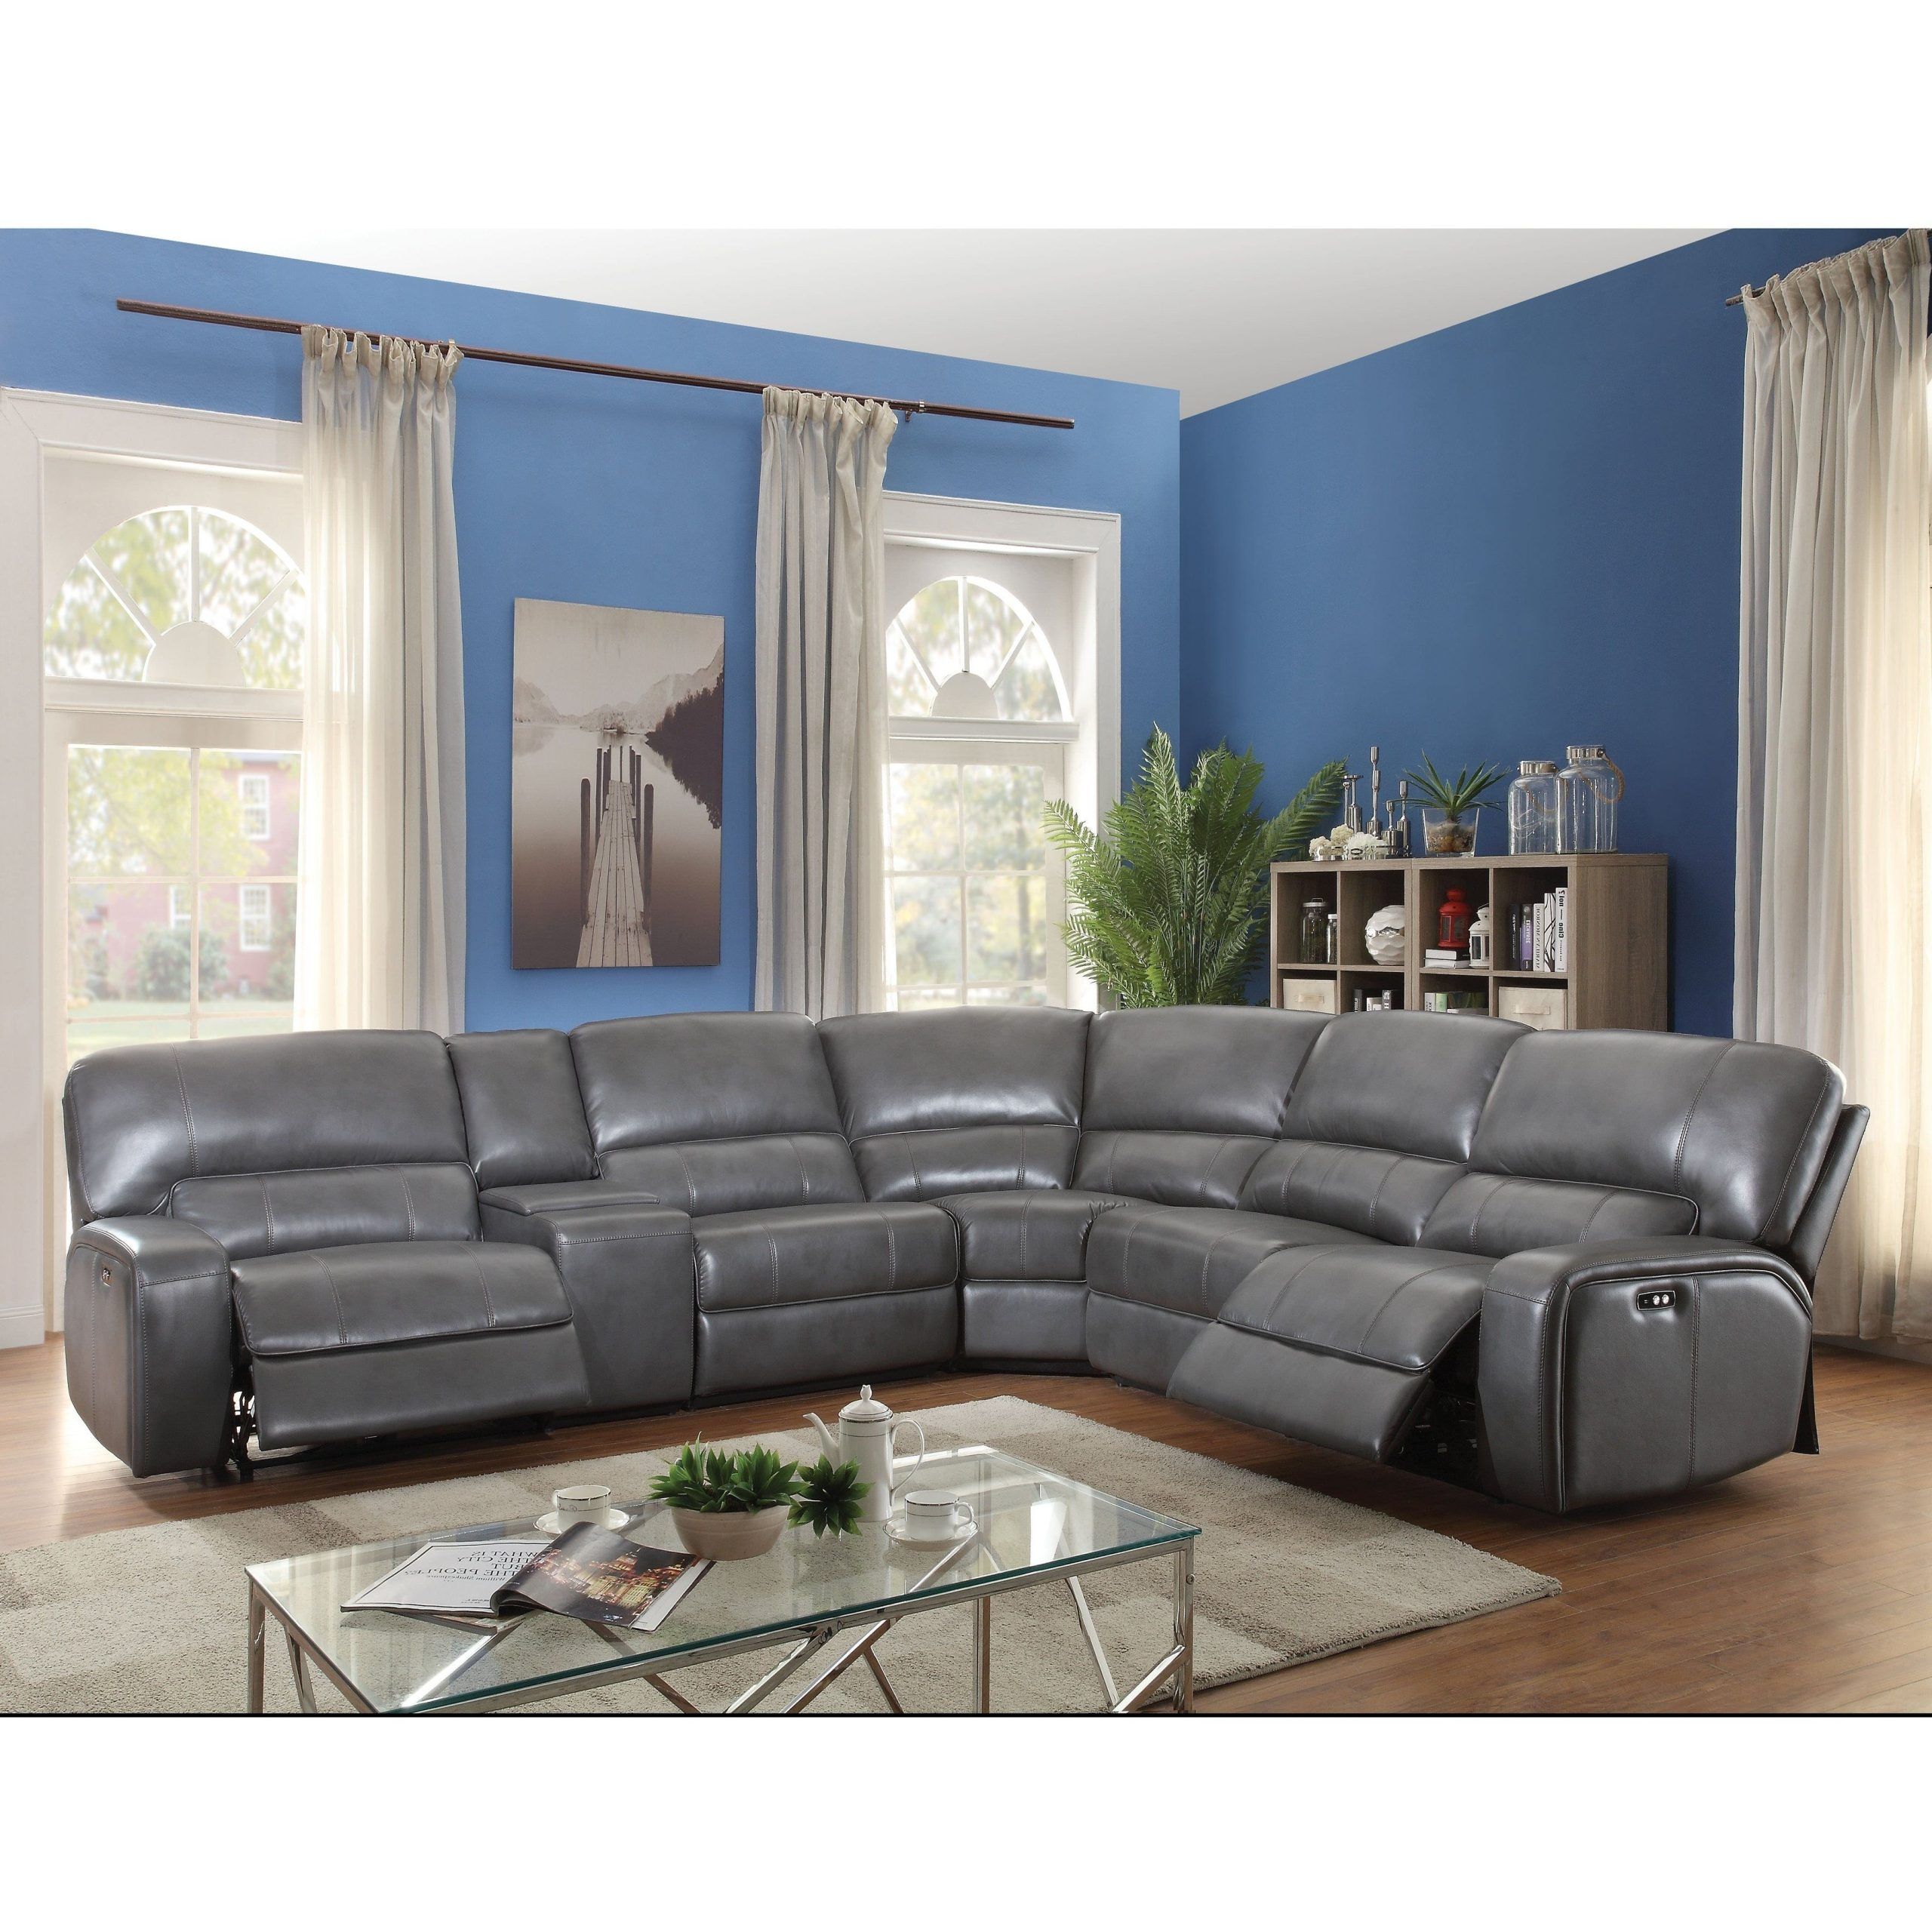 Trendy 3 Piece Leather Sectional Sofa Sets Throughout Acme Saul Sectional Sofa (power Motion/usb Dock), Gray Leather Aire (View 8 of 15)